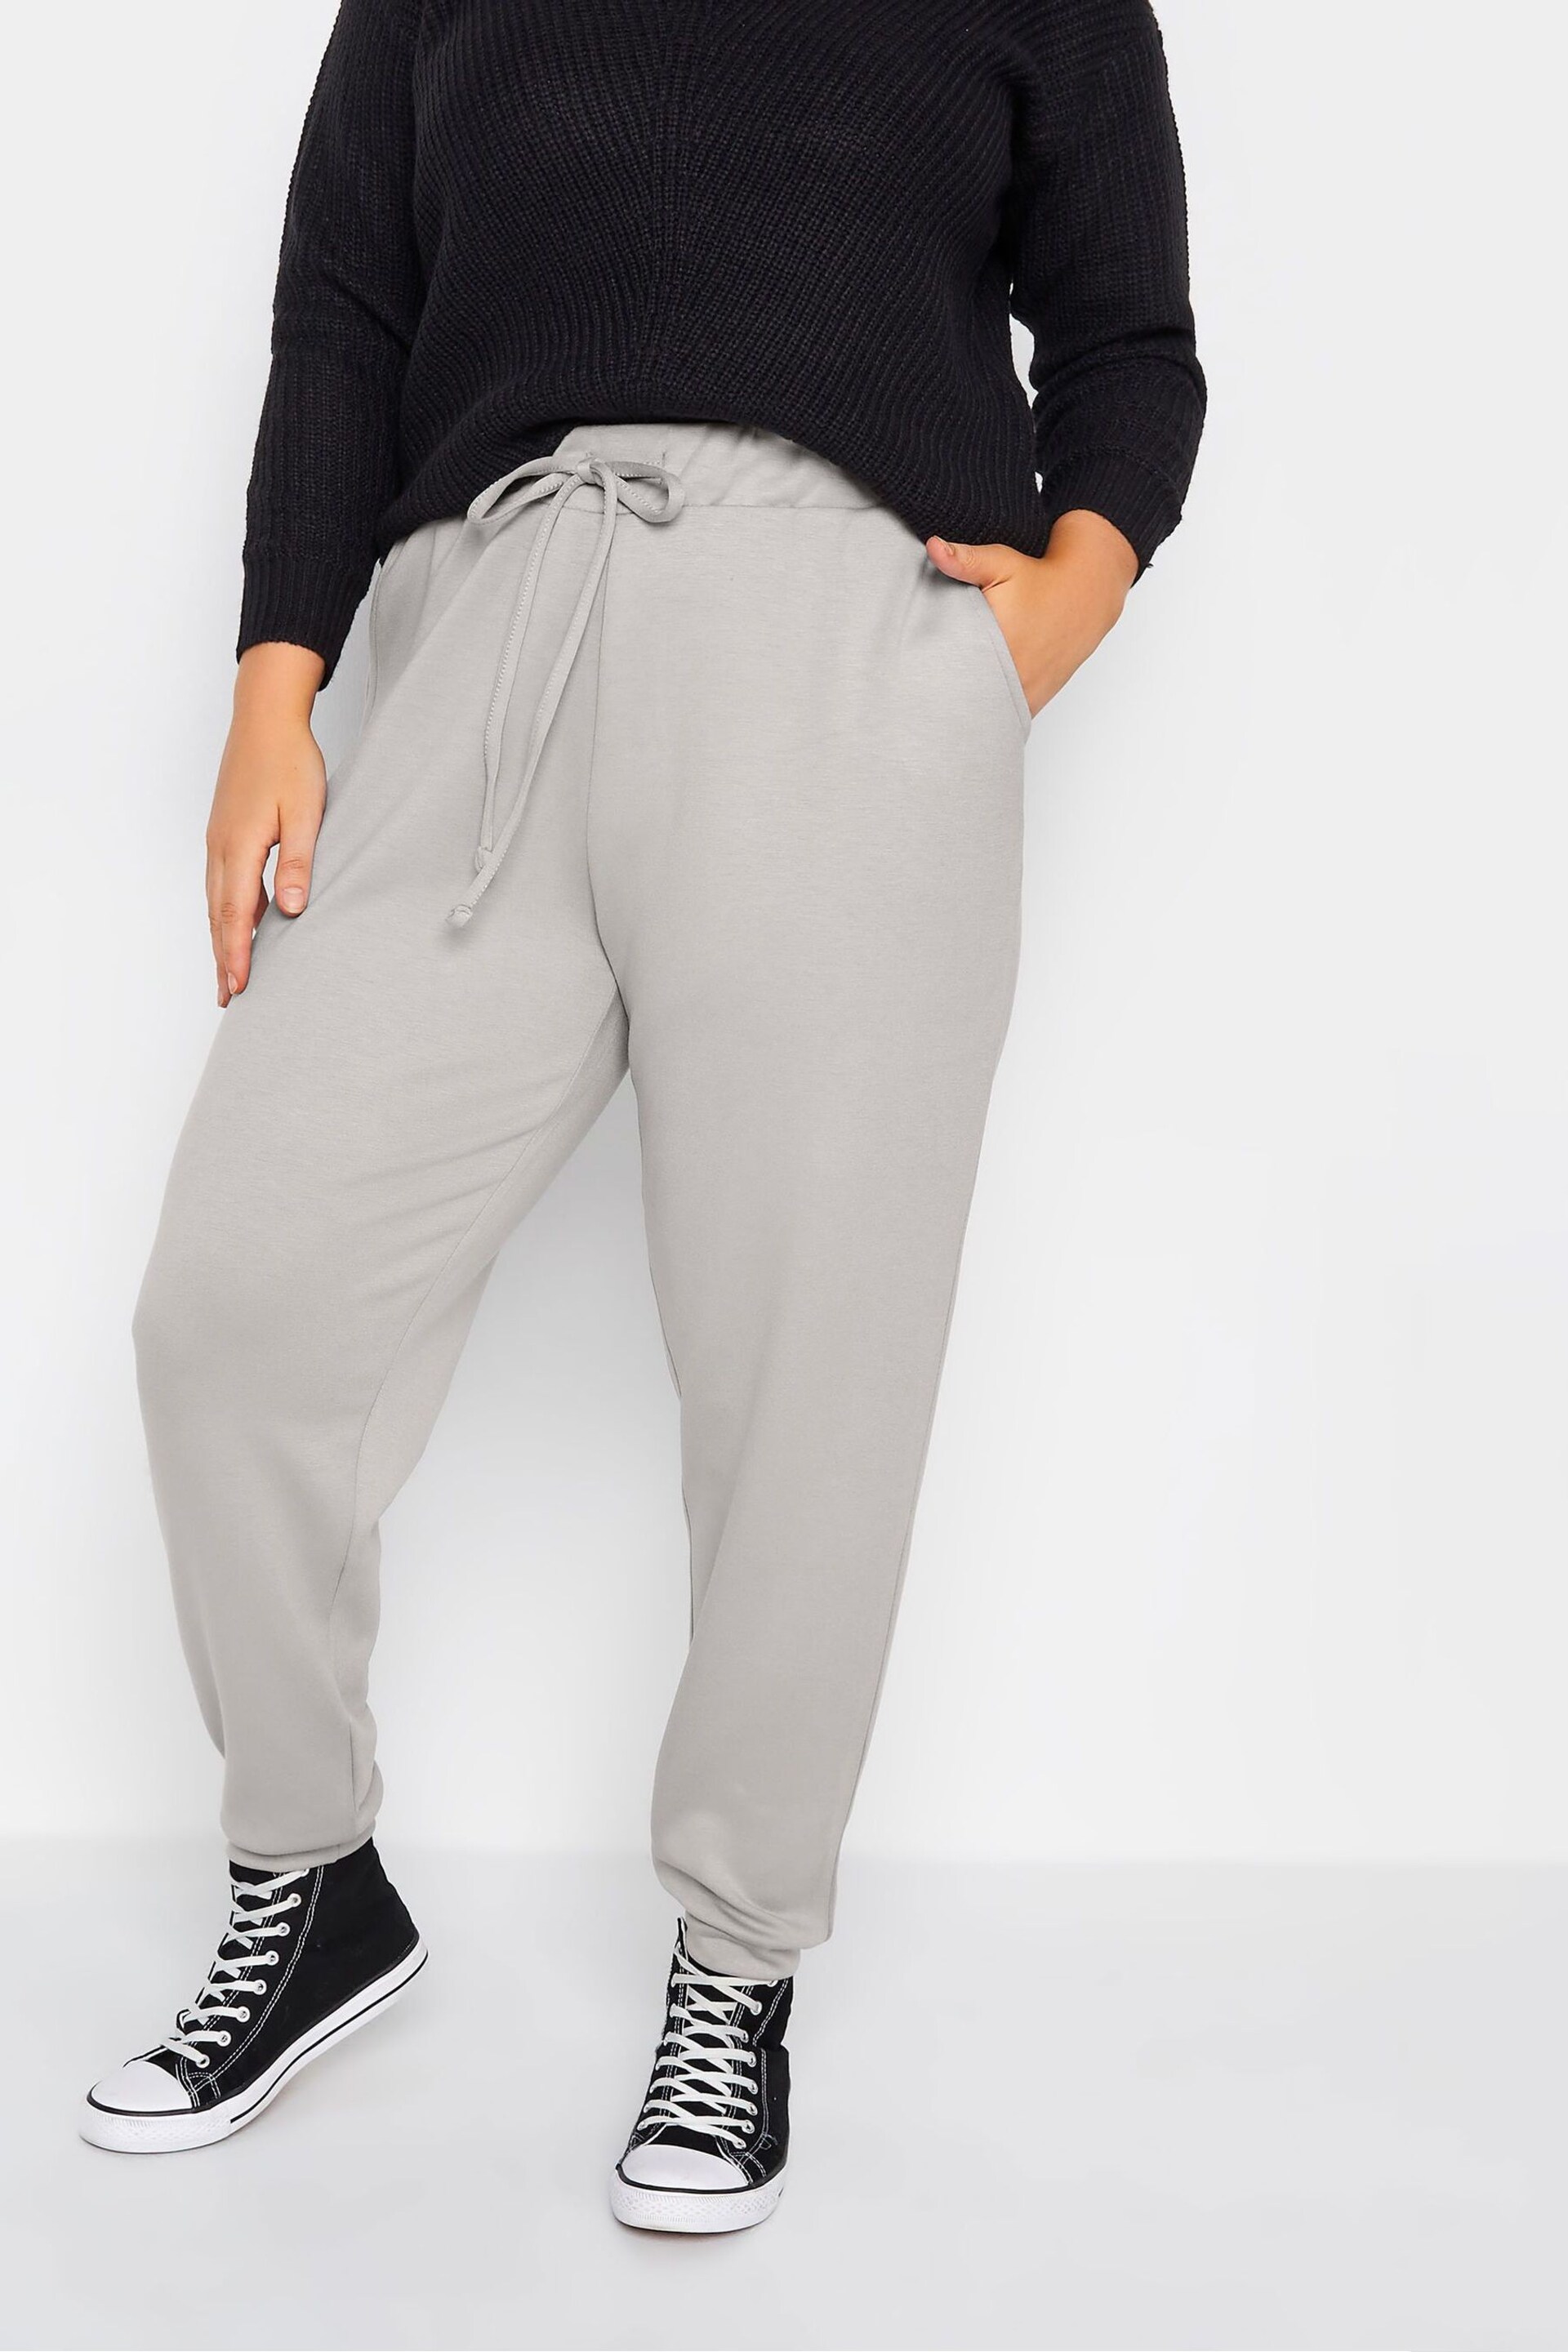 Yours Curve Grey Elasticated Cuff Side Pocket Trousers - Image 1 of 3